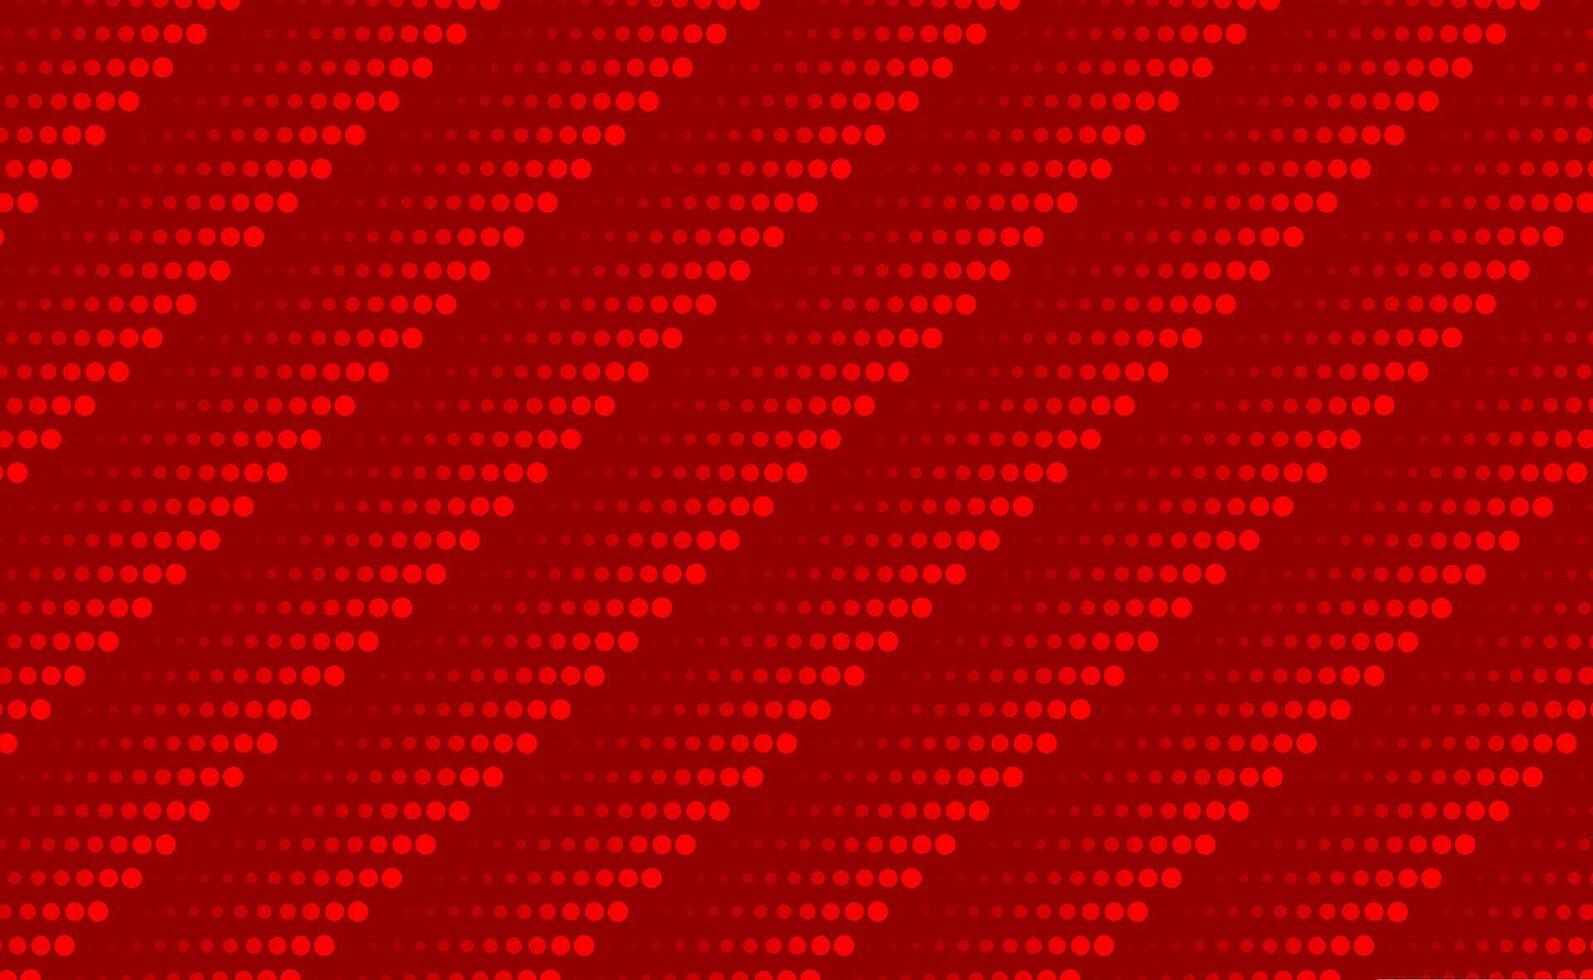 Abstract bright red dotted pattern geometric background vector